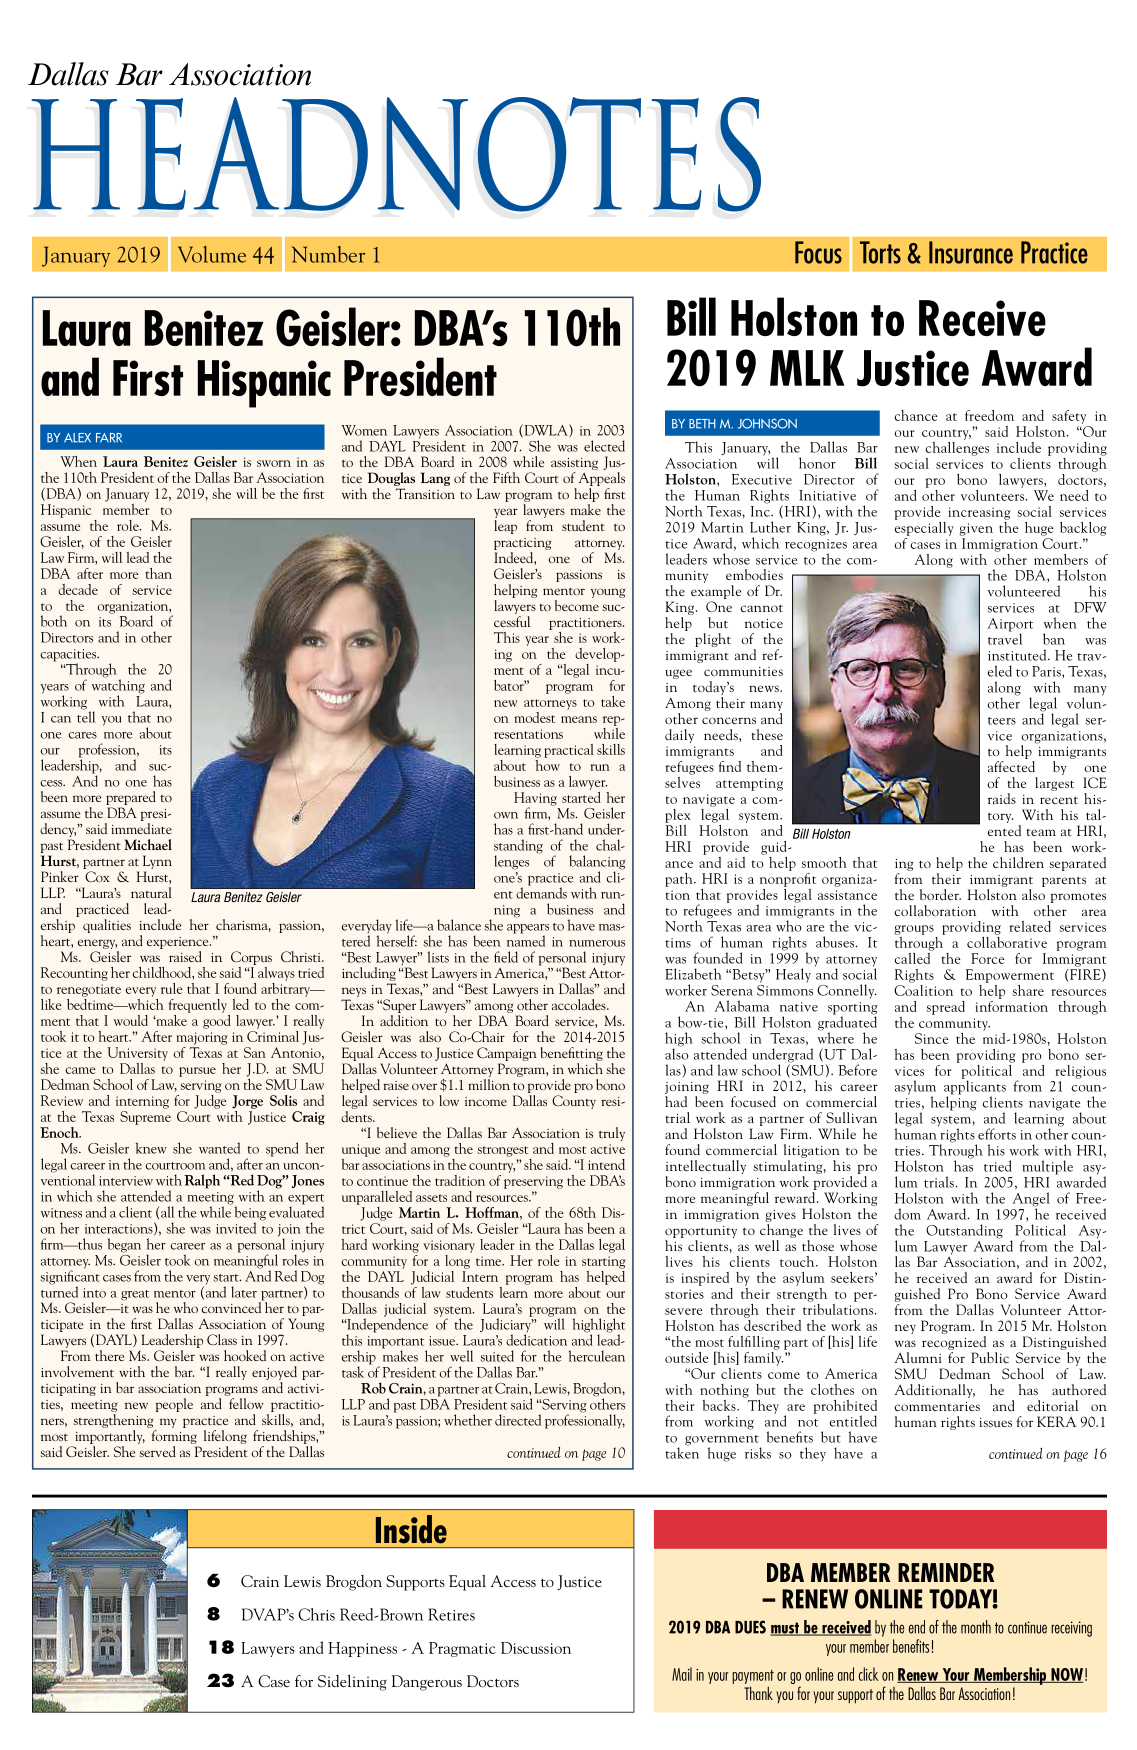 handle is hein.barjournals/hdba0044 and id is 1 raw text is: 



Dallas Bar Association


Laura Benitez Geisler: DBA's l1l0th


and First Hispanic President


Bill Holston to Receive


2019 MLK Justice Award


   When   Laura Benitez Geisler is sworn in as
the 110th President of the Dallas Bar Association
(DBA)  on January 12, 2019, she will be the first
Hispanic  member   to
assume  the role. Ms.
Geisler, of the Geisler
Law Firm, will lead the
DBA   after more than
a  decade  of  service
to  the  organization,
both  on its Board of
Directors and in other
capacities.
   Through   the  20
years of watching and
working  with  Laura,
I can tell you that no
one cares more  about
our   profession,  its
leadership, and  suc-
cess. And no one  has
been more prepared to
assume the DBA  presi-
dency, said immediate
past President Michael
Hurst, partner at Lynn
Pinker Cox  &  Hurst,
LLP.  Laura's natural  Laura Benitez Geler
and   practiced lead-
ership qualities include her charisma, passion,
heart, energy, and experience.
   Ms.  Geisler was raised in Corpus  Christi.
Recounting her childhood, she said I always tried
to renegotiate every rule that I found arbitrary-
like bedtime-which  frequently led to the com-
ment  that I would 'make a good lawyer.' I really
took it to heart. After majoring in Criminal Jus-
tice at the University of Texas at San Antonio,
she came  to Dallas to pursue her J.D. at SMU
Dedman  School of Law, serving on the SMU Law
Review  and interning for Judge Jorge Solis and
at the Texas Supreme  Court with Justice Craig
Enoch.
   Ms.  Geisler knew she wanted  to spend her
legal career in the courtroom and, after an uncon-
ventional interview with Ralph Red Dog Jones
in which she attended a meeting with an expert
witness and a client (all the while being evaluated
on her interactions), she was invited to join the
firm-thus  began her career as a personal injury
attorney. Ms. Geisler took on meaningful roles in
significant cases from the very start. And Red Dog
turned into a great mentor (and later partner) to
Ms. Geisler-it was he who convinced her to par-
ticipate in the first Dallas Association of Young
Lawyers (DAYL)  Leadership Class in 1997.
   From  there Ms. Geisler was hooked on active
involvement with the bar. I really enjoyed par-
ticipating in bar association programs and activi-
ties, meeting new people and  fellow practitio-
ners, strengthening my practice and skills, and,
most  importantly, forming lifelong friendships,
said Geisler. She served as President of the Dallas


Women   Lawyers Association (DWLA) in 2003
and  DAYL  President in 2007. She was  elected
to the DBA   Board in 2008 while assisting Jus-
tice Douglas Lang of the Fifth Court of Appeals
with the Transition to Law program to help first
                        year lawyers make the
                        leap from  student to
                        practicing   attorney.
                        Indeed,  one  of  Ms.
                        Geisler's passions  is
                        helping mentor young
                        lawyers to become suc-
                        cessful  practitioners.
                        This year she is work-
                        ing  on  the develop-
                        ment  of a legal incu-
                        bator  program   for
                        new  attorneys to take
                        on modest  means rep-
                        resentations    while
                        learning practical skills
                        about  how  to run  a
                        business as a lawyer.
                           Having  started her
                        own  firm, Ms. Geisler
                        has a first-hand under-
                        standing of the chal-
                        lenges  of  balancing
                        one's practice and cli-
                        ent demands with run-
                        ning  a  business and
everyday life-a balance she appears to have mas-
tered herself: she has been named in numerous
Best Lawyer lists in the field of personal injury
including Best Lawyers in America, Best Attor-
neys in Texas, and Best Lawyers in Dallas and
Texas Super Lawyers among other accolades.
   In addition to her DBA   Board service, Ms.
Geisler was also Co-Chair  for the 2014-2015
Equal Access to Justice Campaign benefitting the
Dallas Volunteer Attorney Program, in which she
helped raise over $1.1 million to provide pro bono
legal services to low income Dallas County resi-
dents.
   I believe the Dallas Bar Association is truly
unique and among  the strongest and most active
bar associations in the country, she said. I intend
to continue the tradition of preserving the DBA's
unparalleled assets and resources.
   Judge Martin  L. Hoffman,  of the 68th Dis-
trict Court, said of Ms. Geisler Laura has been a
hard working visionary leader in the Dallas legal
community  for a long time. Her role in starting
the DAYL   Judicial Intern program has helped
thousands of law students learn more about our
Dallas judicial system. Laura's program on the
Independence  of the Judiciary will highlight
this important issue. Laura's dedication and lead-
ership makes her well suited for the herculean
task of President of the Dallas Bar.
   Rob  Crain, a partner at Crain, Lewis, Brogdon,
LLP  and past DBA President said Serving others
is Laura's passion; whether directed professionally,

                          continued on page 10


   This  January, the  Dallas Bar
Association    will  honor    Bill
Holston,   Executive  Director  of
the  Human   Rights  Initiative of
North  Texas, Inc. (HRI), with the
2019  Martin Luther  King, Jr. Jus-
tice Award, which  recognizes area
leaders whose service to the com-
munity embodies
the example  of Dr.
King.  One  cannot
help   but   notice
the  plight of  the
immigrant  and ref-
ugee  communities
in   today's news.
Among   their many
other concerns and
daily needs,  these
immigrants     and
refugees find them-
selves  attempting
to navigate a com-
plex  legal system.
Bill Holston   and  Bill Holston
HRI   provide  guid-
ance  and aid to help smooth  that
path. HRI  is a nonprofit organiza-
tion that provides legal assistance
to refugees and immigrants  in the
North  Texas area who are the vic-
tims  of human   rights abuses. It
was  founded  in 1999 by  attorney
Elizabeth Betsy Healy and social
worker Serena  Simmons  Connelly.
   An   Alabama   native  sporting
a bow-tie, Bill Holston graduated
high  school in  Texas, where  he
also attended undergrad (UT  Dal-
las) and law school (SMU). Before
joining HRI   in 2012,  his career
had  been focused  on commercial
trial work as a partner of Sullivan
and  Holston Law  Firm. While  he
found  commercial  litigation to be
intellectually stimulating, his pro
bono  immigration work provided  a
more  meaningful reward. Working
in immigration  gives Holston  the
opportunity to change  the lives of
his clients, as well as those whose
lives his clients touch.  Holston
is inspired by the asylum seekers'
stories and their strength to per-
severe through  their tribulations.
Holston  has described the work as
the most fulfilling part of [his] life
outside [his] family.
   Our  clients come to America
with  nothing but  the clothes on
their backs. They  are prohibited
from  working   and  not  entitled
to government   benefits but have
taken  huge  risks so they have  a


chance  at freedom  and  safety in
our country, said Holston.  Our
new  challenges include providing
social services to clients through
our  pro  bono   lawyers, doctors,
and other  volunteers. We need  to
provide  increasing social services
especially given the huge backlog
of cases in Immigration Court.
   Along  with  other members   of
               the DBA,   Holston
               volunteered     his
               services  at DFW
               Airport  when   the
               travel   ban   was
               instituted. He trav-
               eled to Paris, Texas,
               along  with  many
               other legal volun-
               teers and legal ser-
               vice organizations,
               to help immigrants
               affected  by   one
               of the largest ICE
               raids in recent his-
               tory. With his tal-
               ented team at HRI,
               he has been  work-
ing to help the children separated
from  their immigrant  parents  at
the border. Holston also promotes
collaboration  with   other   area
groups  providing related services
through  a  collaborative program
called  the Force  for  Immigrant
Rights  &  Empowerment (FIRE)
Coalition  to help share resources
and  spread  information  through
the community.
   Since  the mid-1980s,  Holston
has been  providing pro bono  ser-
vices  for political and  religious
asylum  applicants from  21 coun-
tries, helping clients navigate the
legal system, and  learning about
human  rights efforts in other coun-
tries. Through his work with HRI,
Holston  has  tried multiple  asy-
lum  trials. In 2005, HRI awarded
Holston  with  the Angel  of Free-
dom  Award.  In 1997, he  received
the  Outstanding   Political Asy-
lum  Lawyer  Award  from the Dal-
las Bar Association, and in 2002,
he  received an award  for Distin-
guished  Pro Bono  Service Award
from  the Dallas Volunteer  Attor-
ney Program.  In 2015 Mr. Holston
was recognized  as a Distinguished
Alumni   for Public Service by the
SMU Dedman School of Law.
Additionally,  he   has  authored
commentaries and editorial on
human  rights issues for KERA 90.1

               continued on page 16


6 Crain Lewis Brogdon Supports Equal Access to Justice


8 DVAP's Chris Reed-Brown Retires


1 8  Lawyers   and Happiness   - A Pragmatic  Discussion

23   A  Case  for Sidelining Dangerous   Doctors


